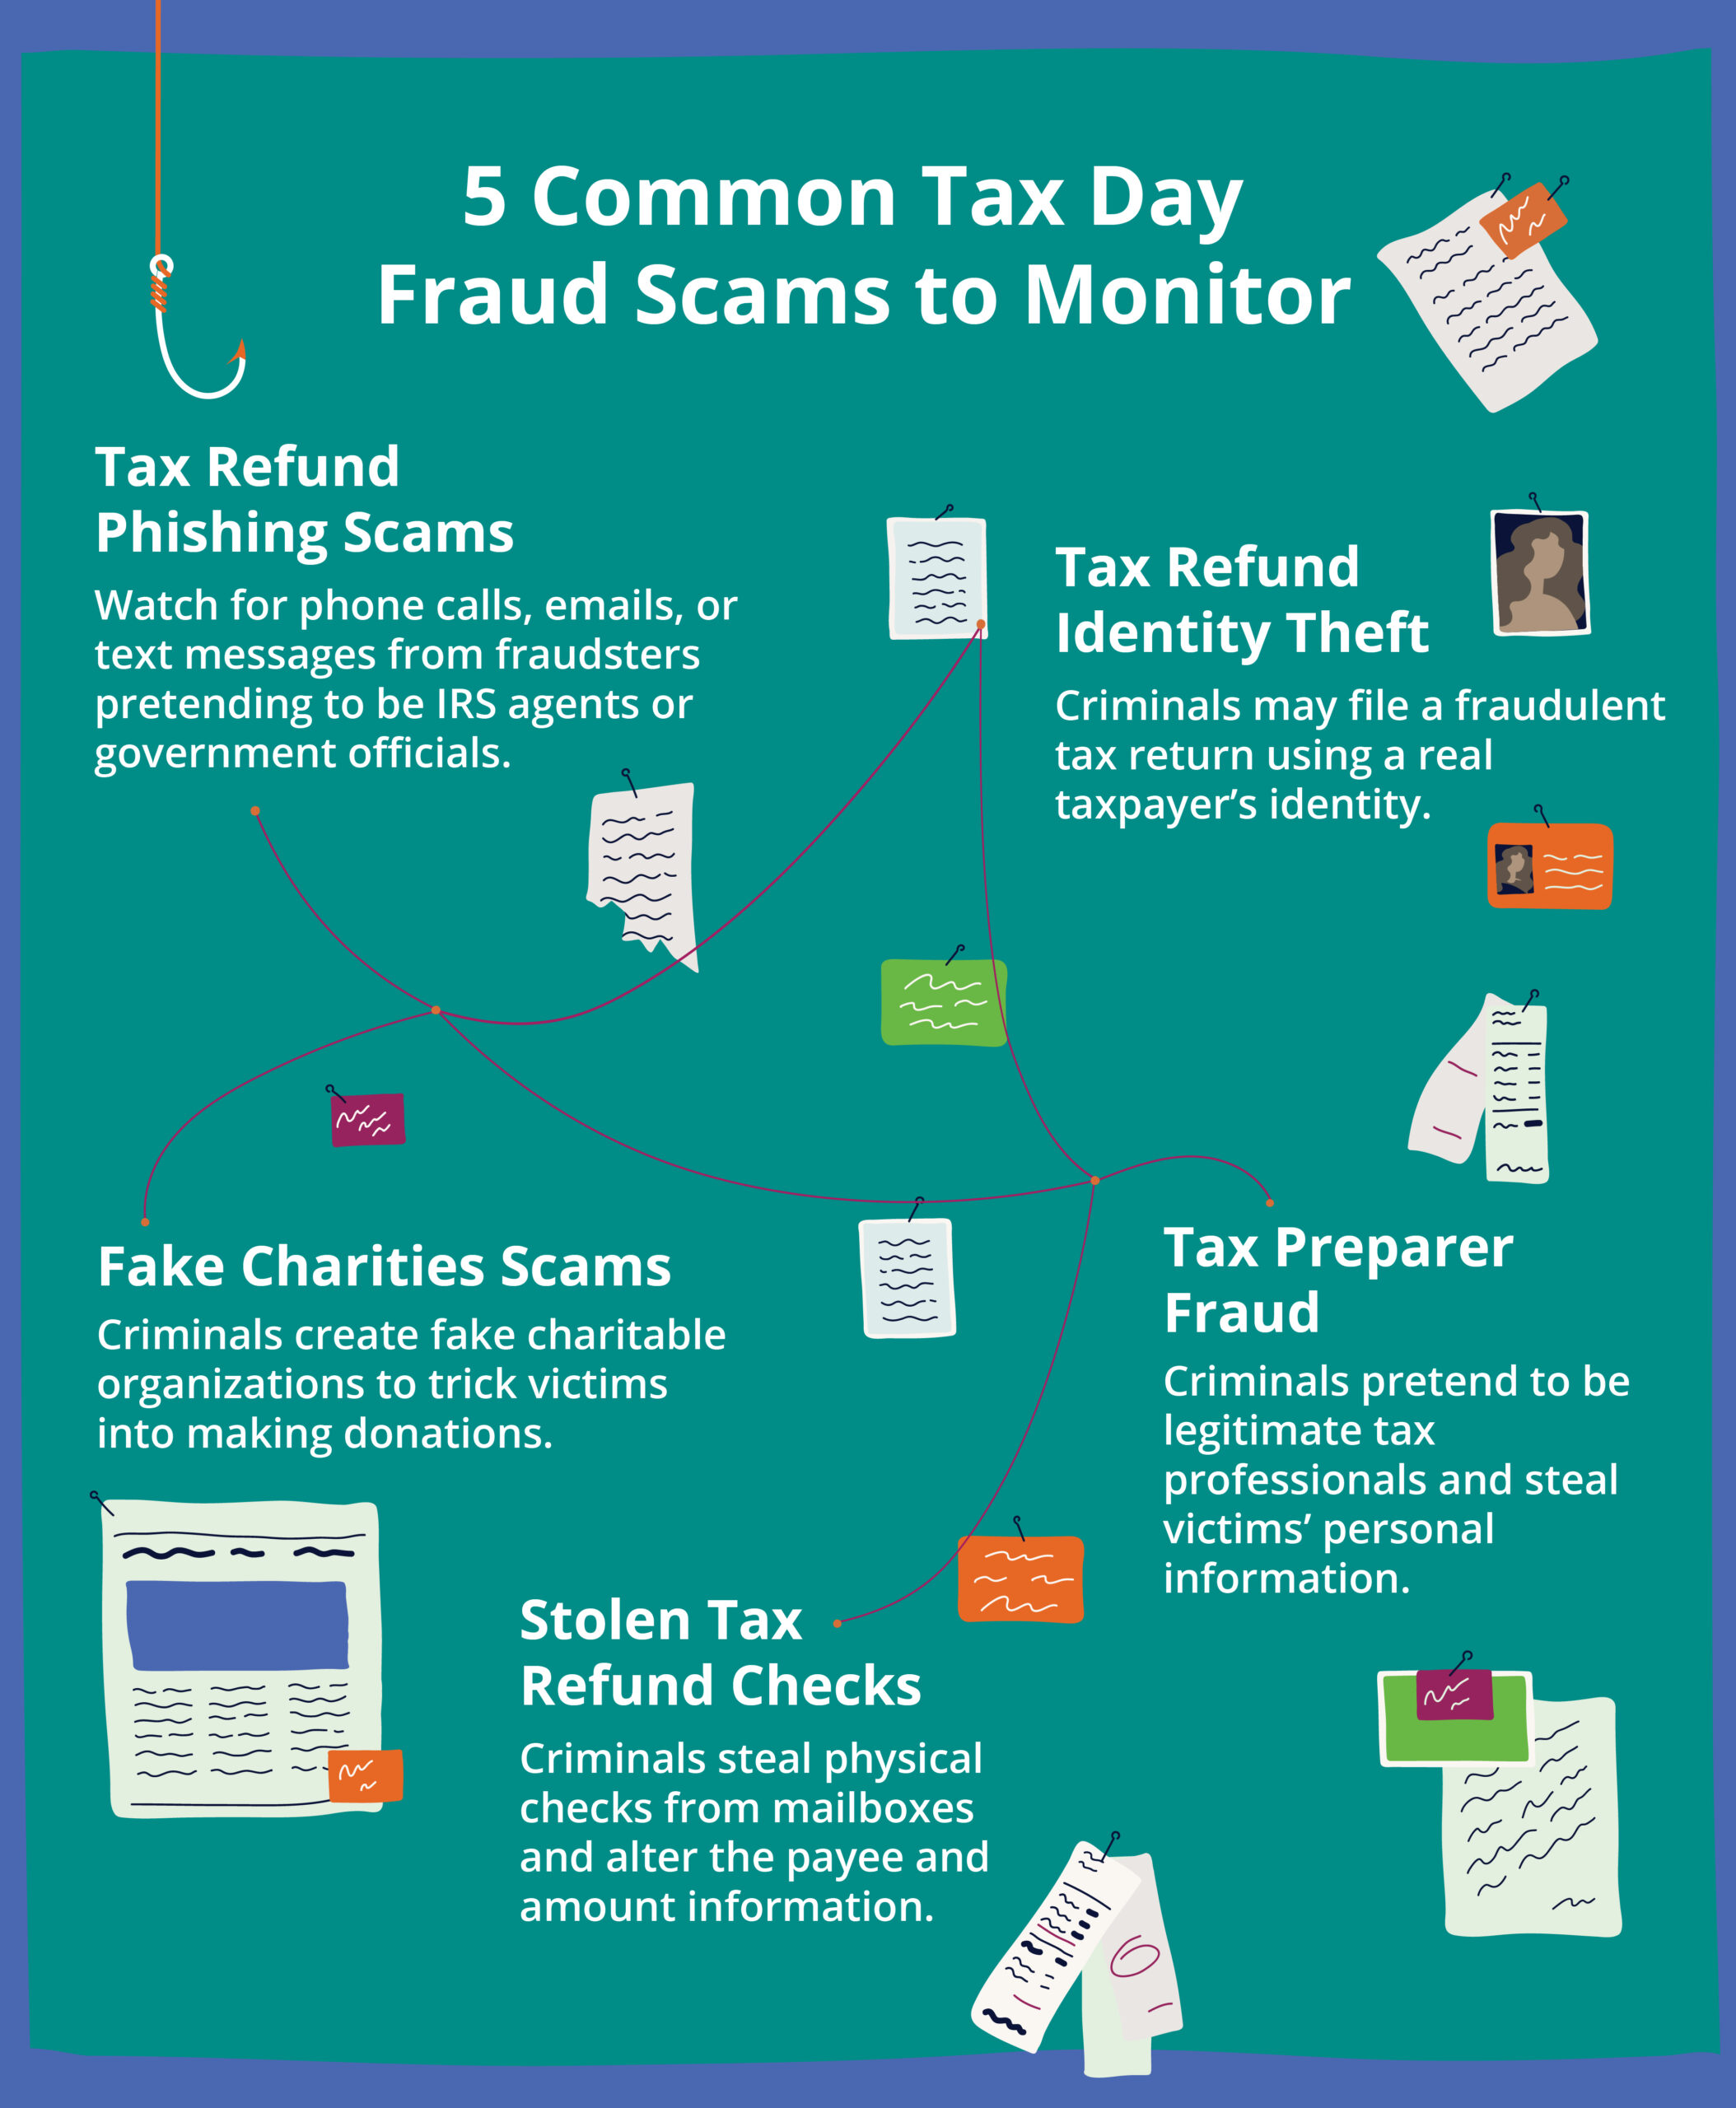 5 Common Tax Day Fraud Scams to Monitor. 1. Tax Refund Phishing Scams; 2. ;Tax Refund Identity Theft; 3. Tax Preparer Fraud; 4. Fake Charities Scams; 5. Stolen Tax Refund Checks